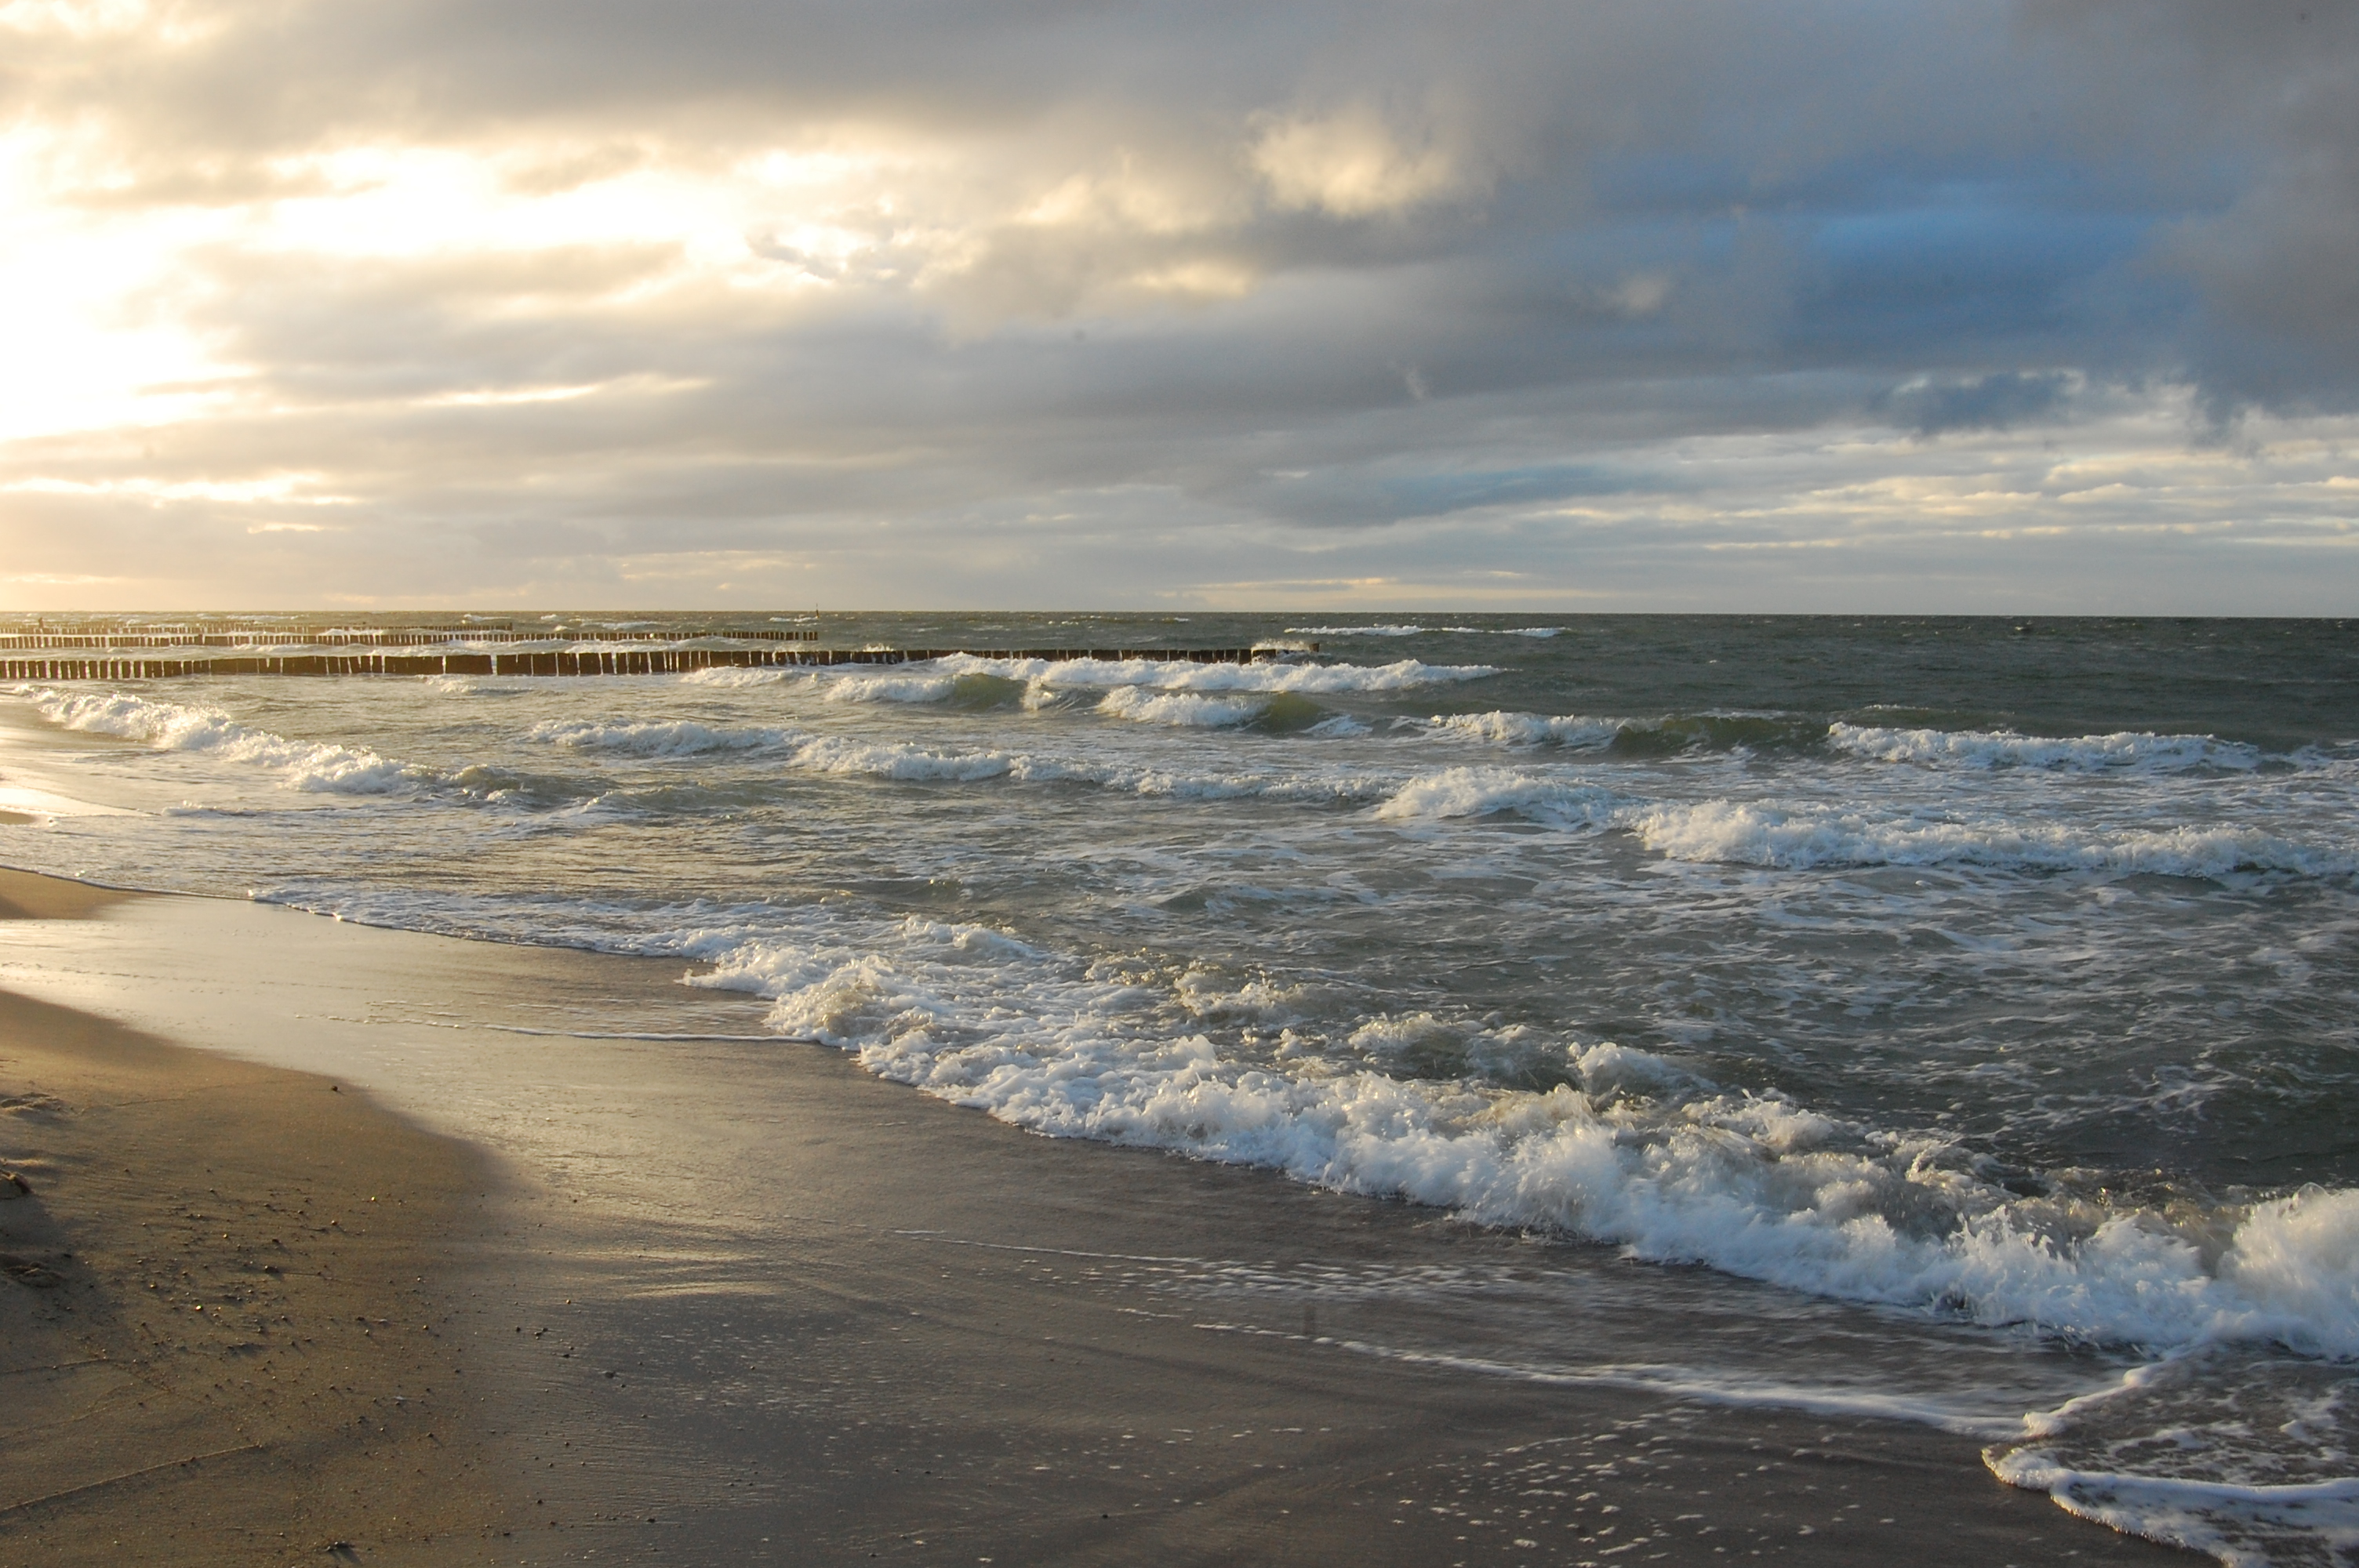 the waves of the Baltic Sea by onethatranaway